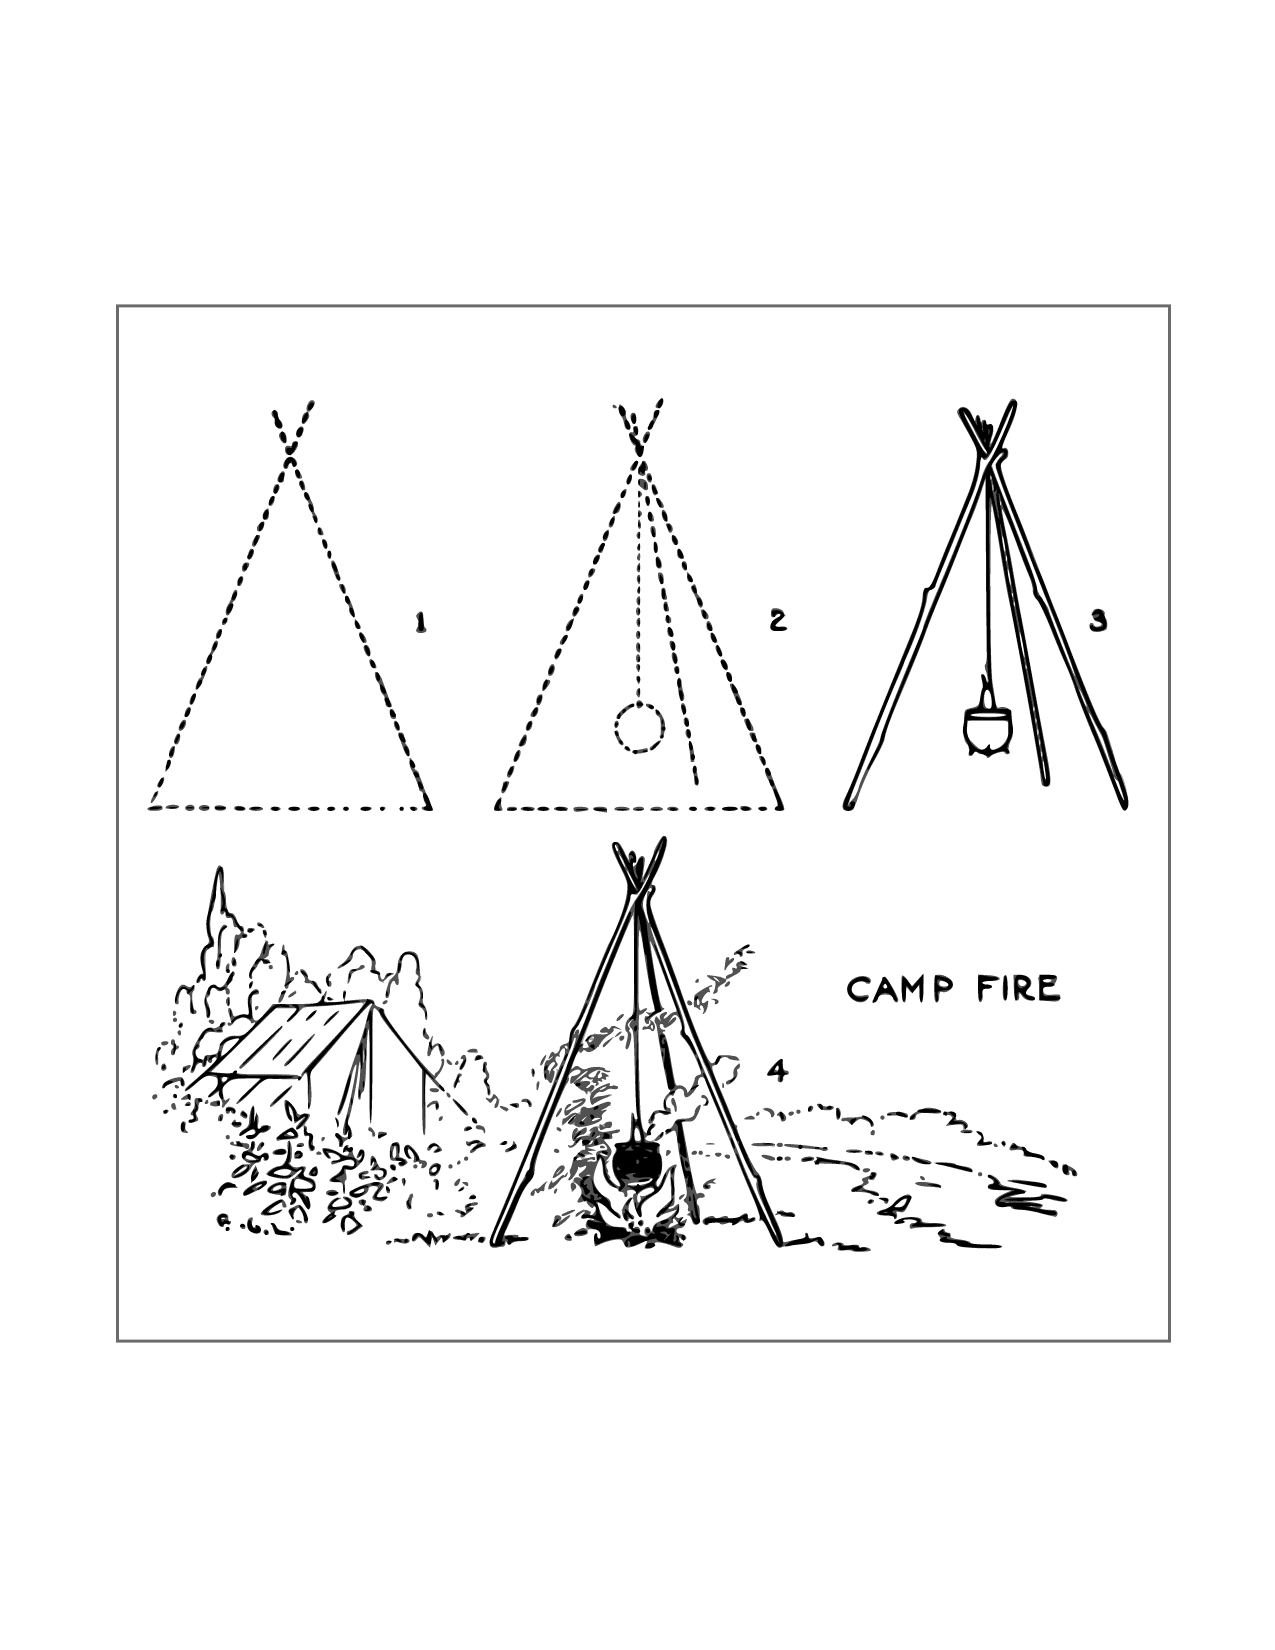 Campfire Instructions Coloring Pge